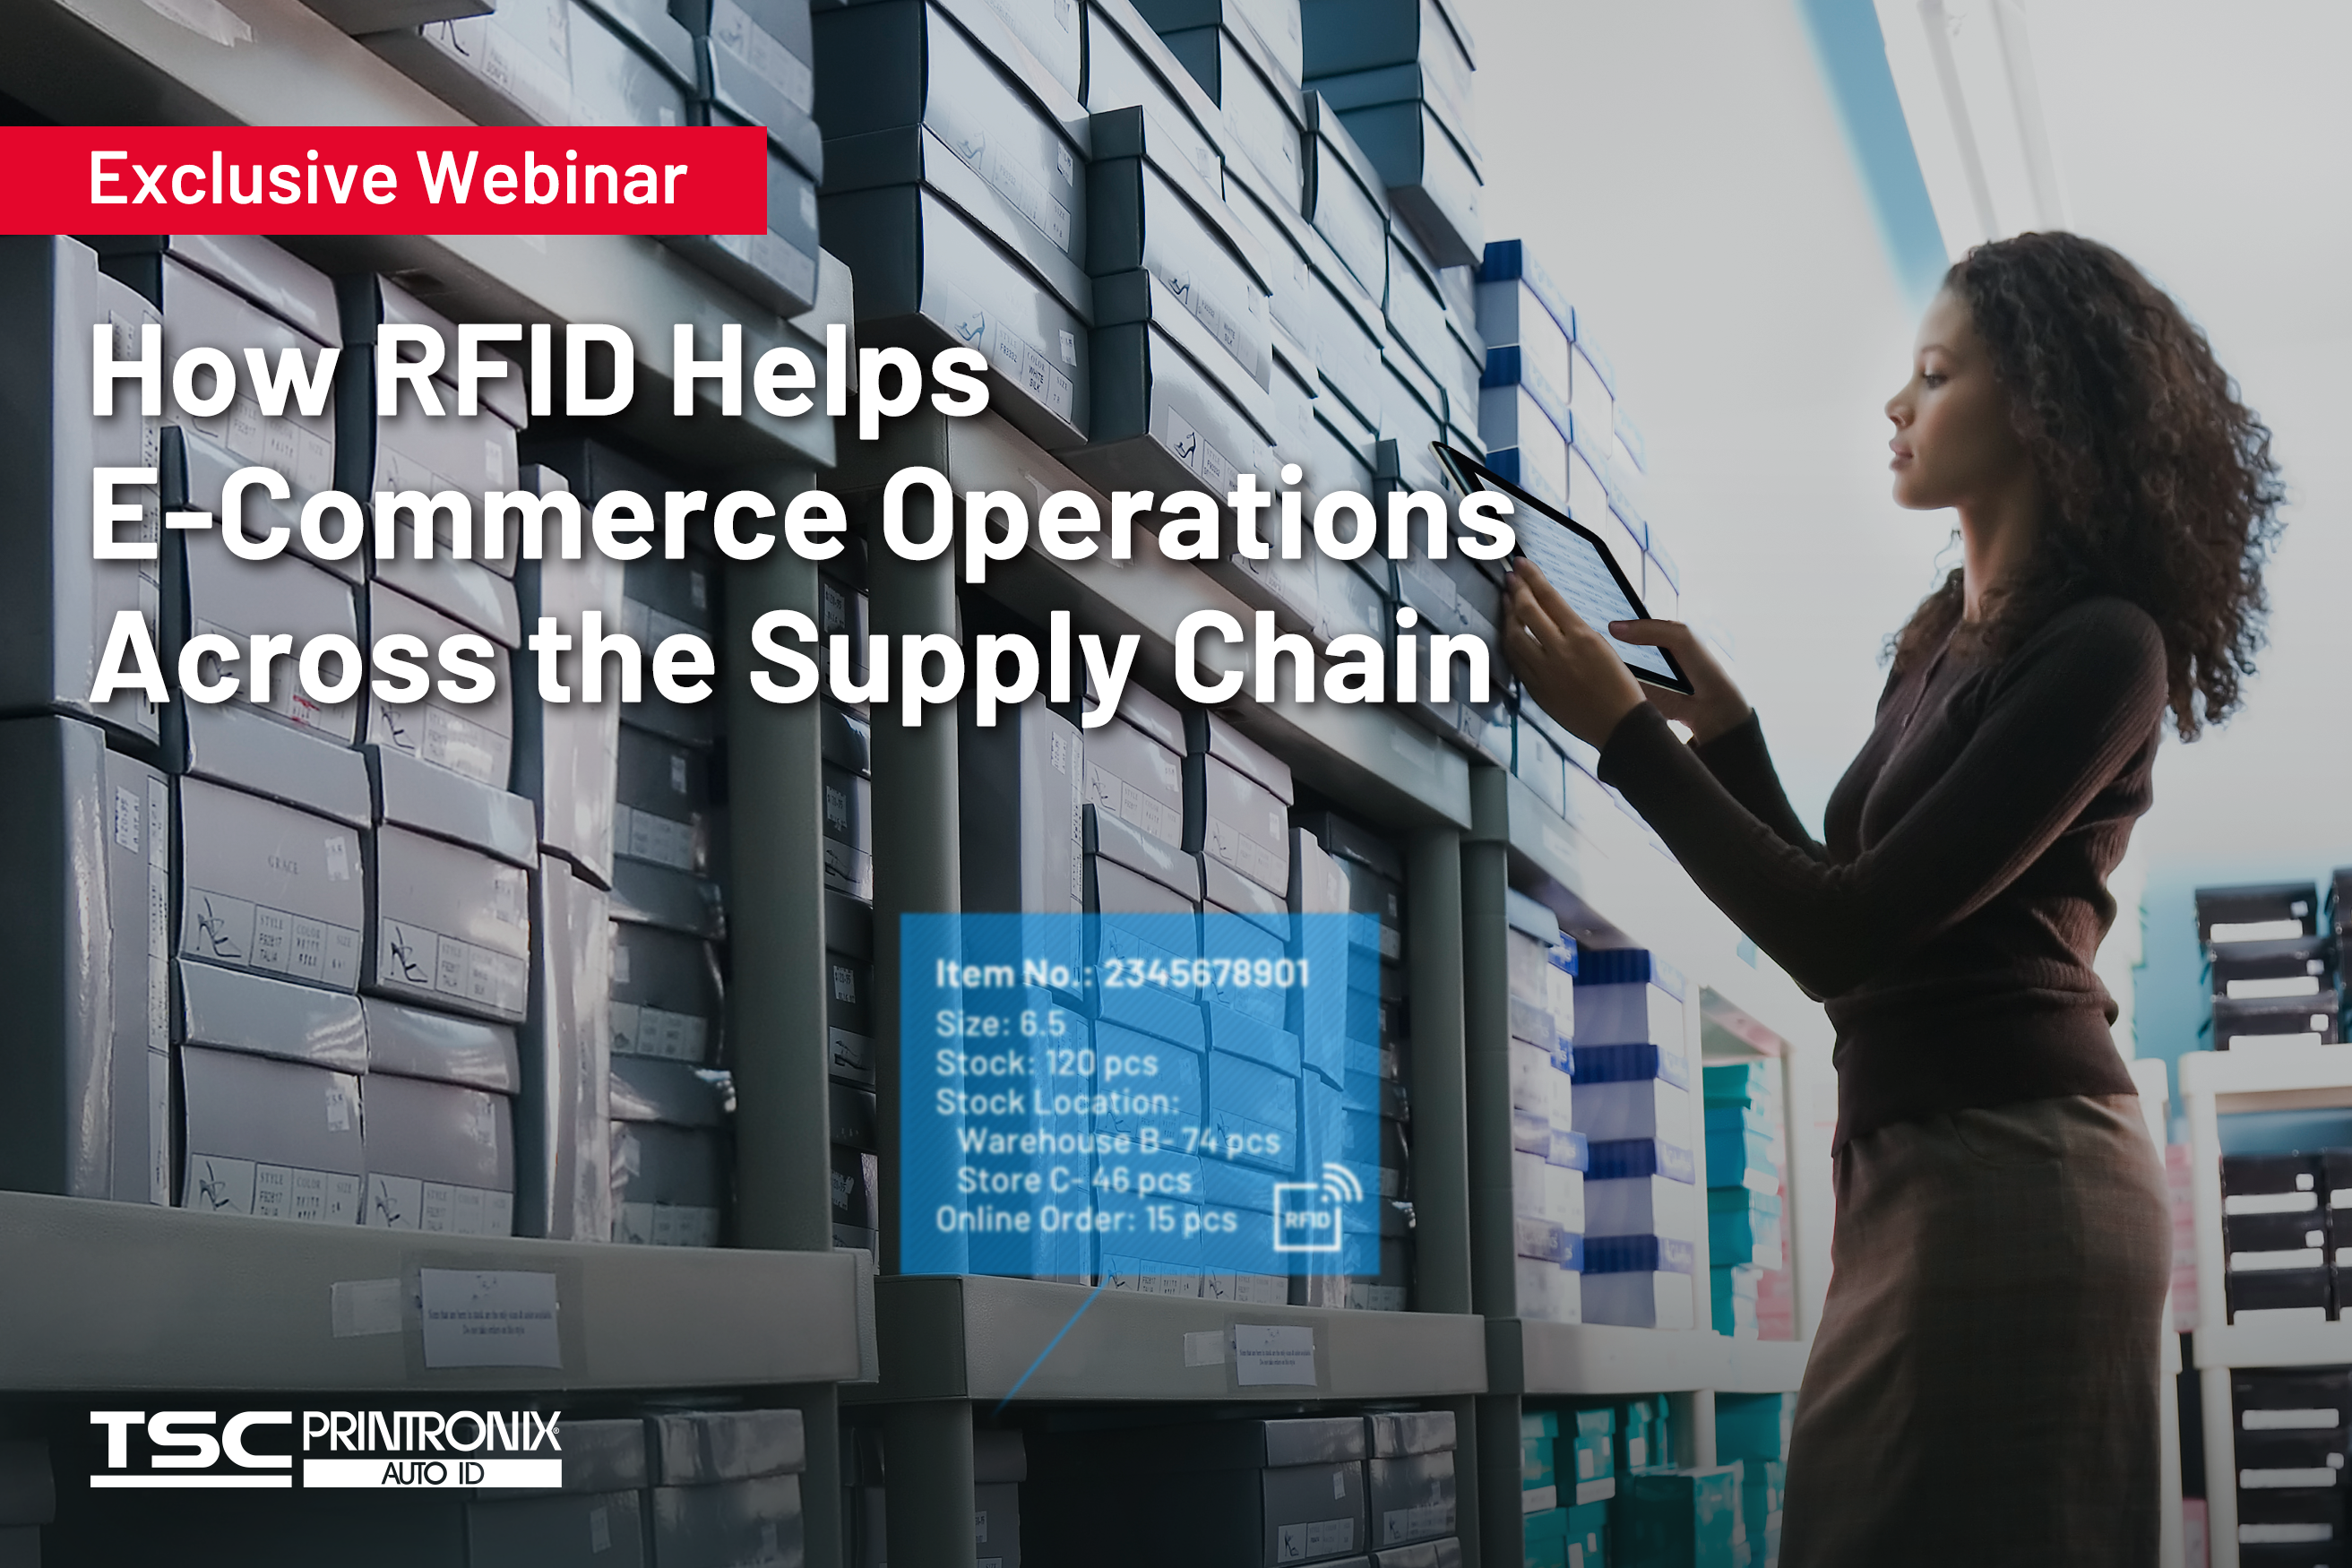 Exclusive Webinar - How RFID Helps E-Commerce Operations Across the Supply Chain